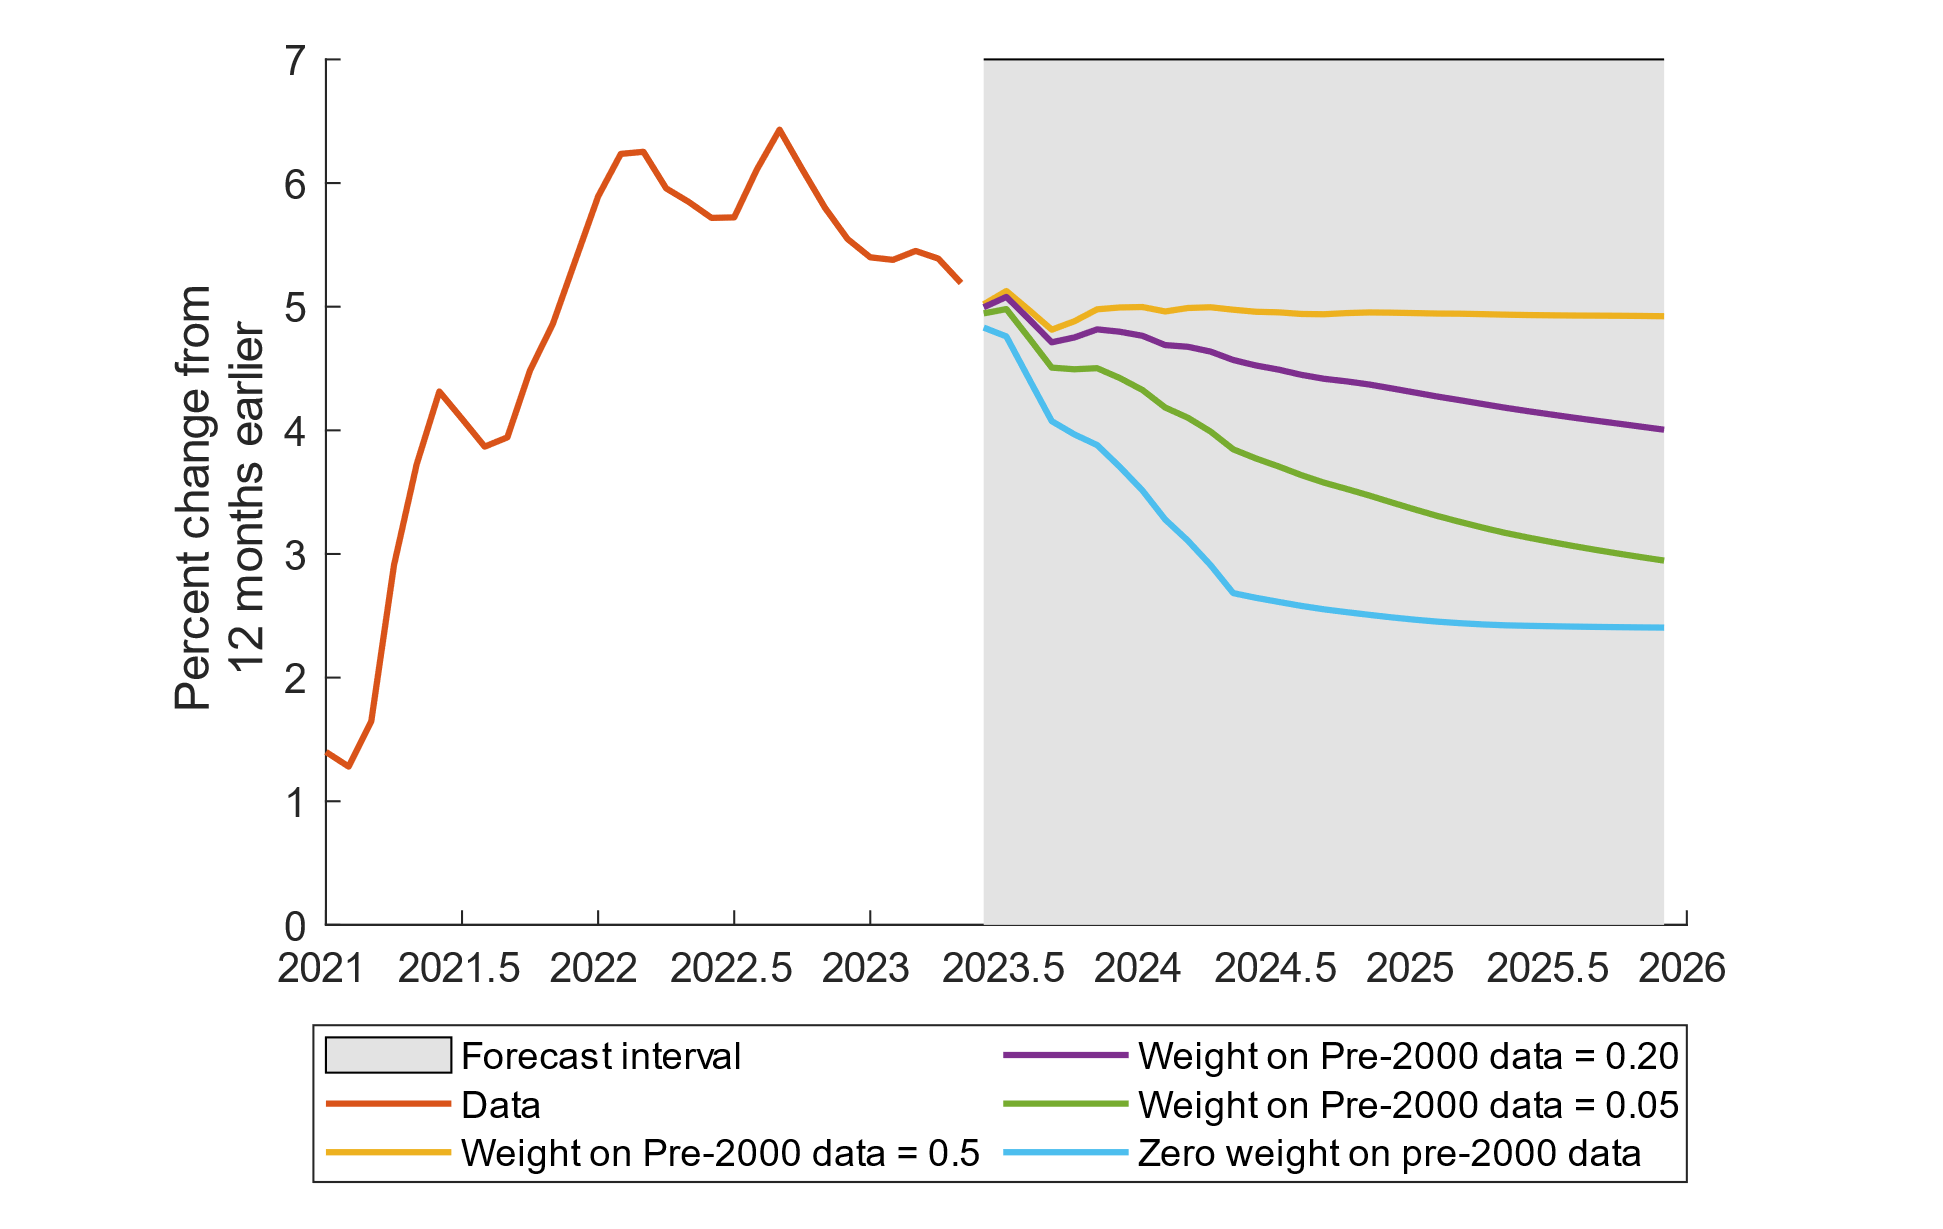 Figure 1. Forecasts for Core CPI Inflation. See accessible link for data.